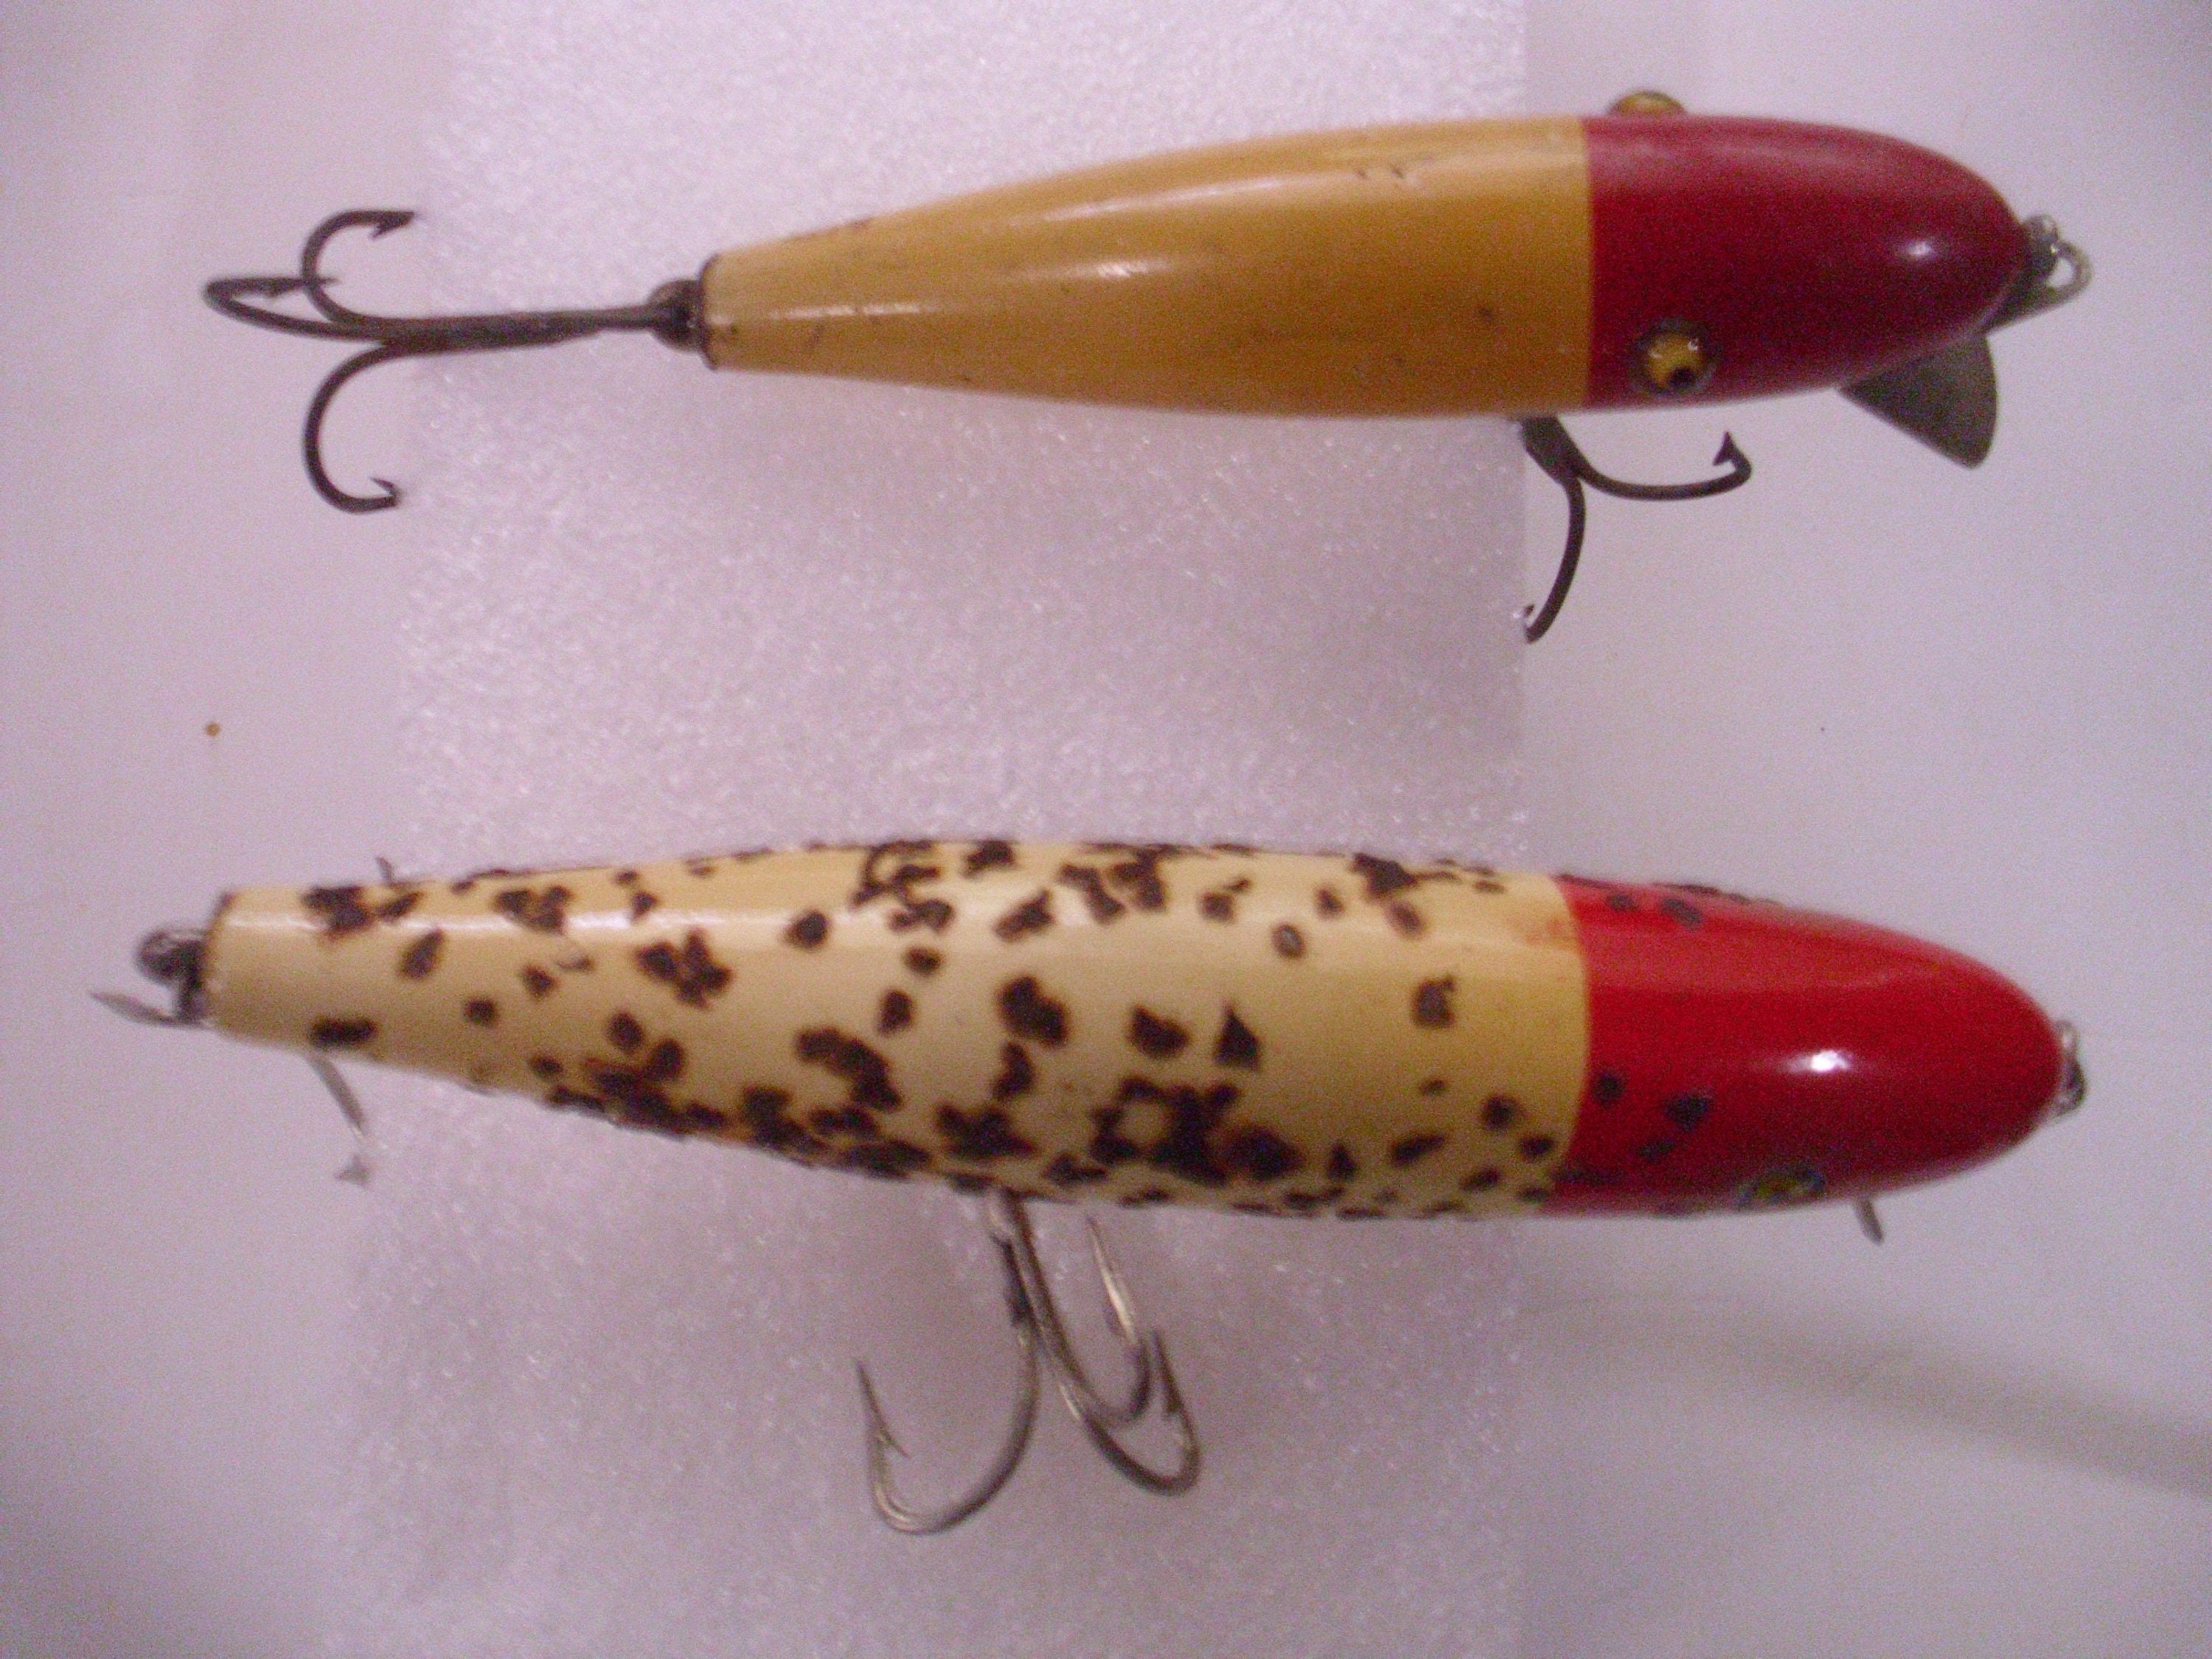 Two Vintage Fishing Lures , Pflueger Fish Lures, Fishing Lure Lot,  Fisherman Gift, Palomine Lures, Wood Lures, Antique Lures 